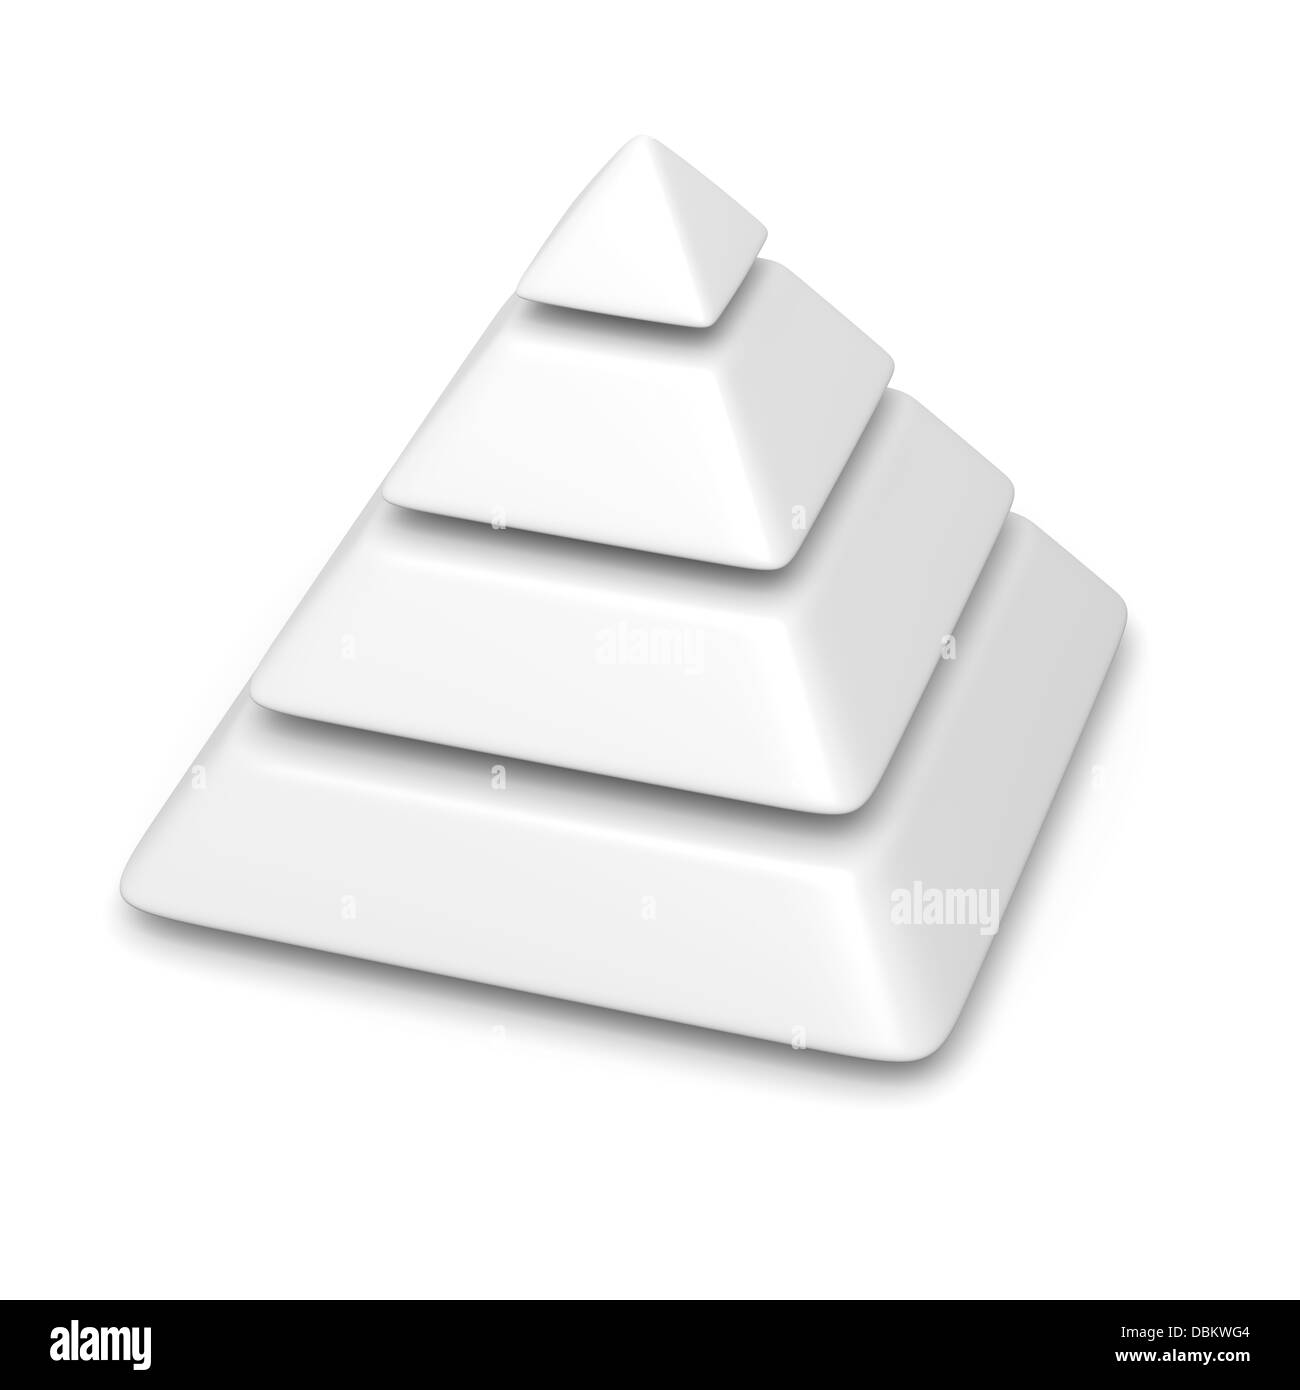 white blank pyramid 4 levels stack chart with shadow 3d illustration Stock Photo